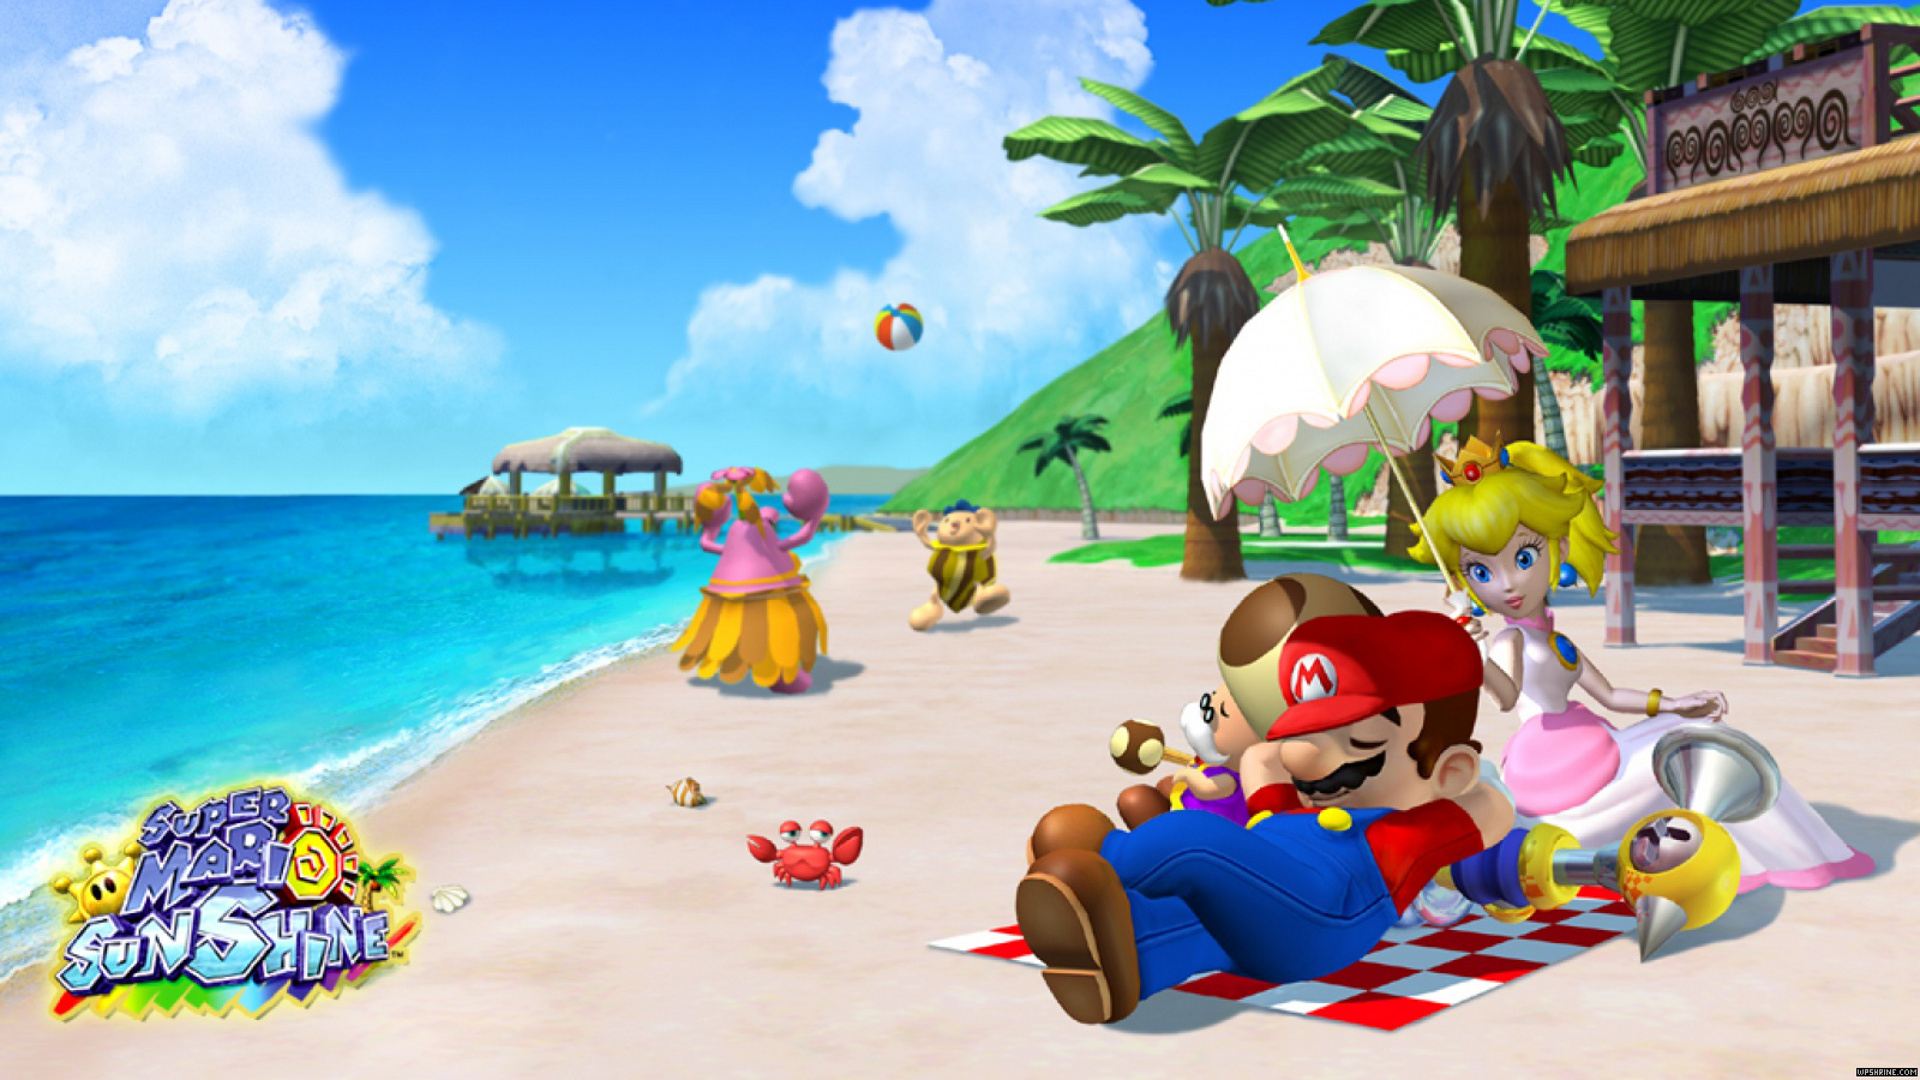 4 Super Mario Sunshine HD Wallpapers | Backgrounds - Wallpaper Abyss